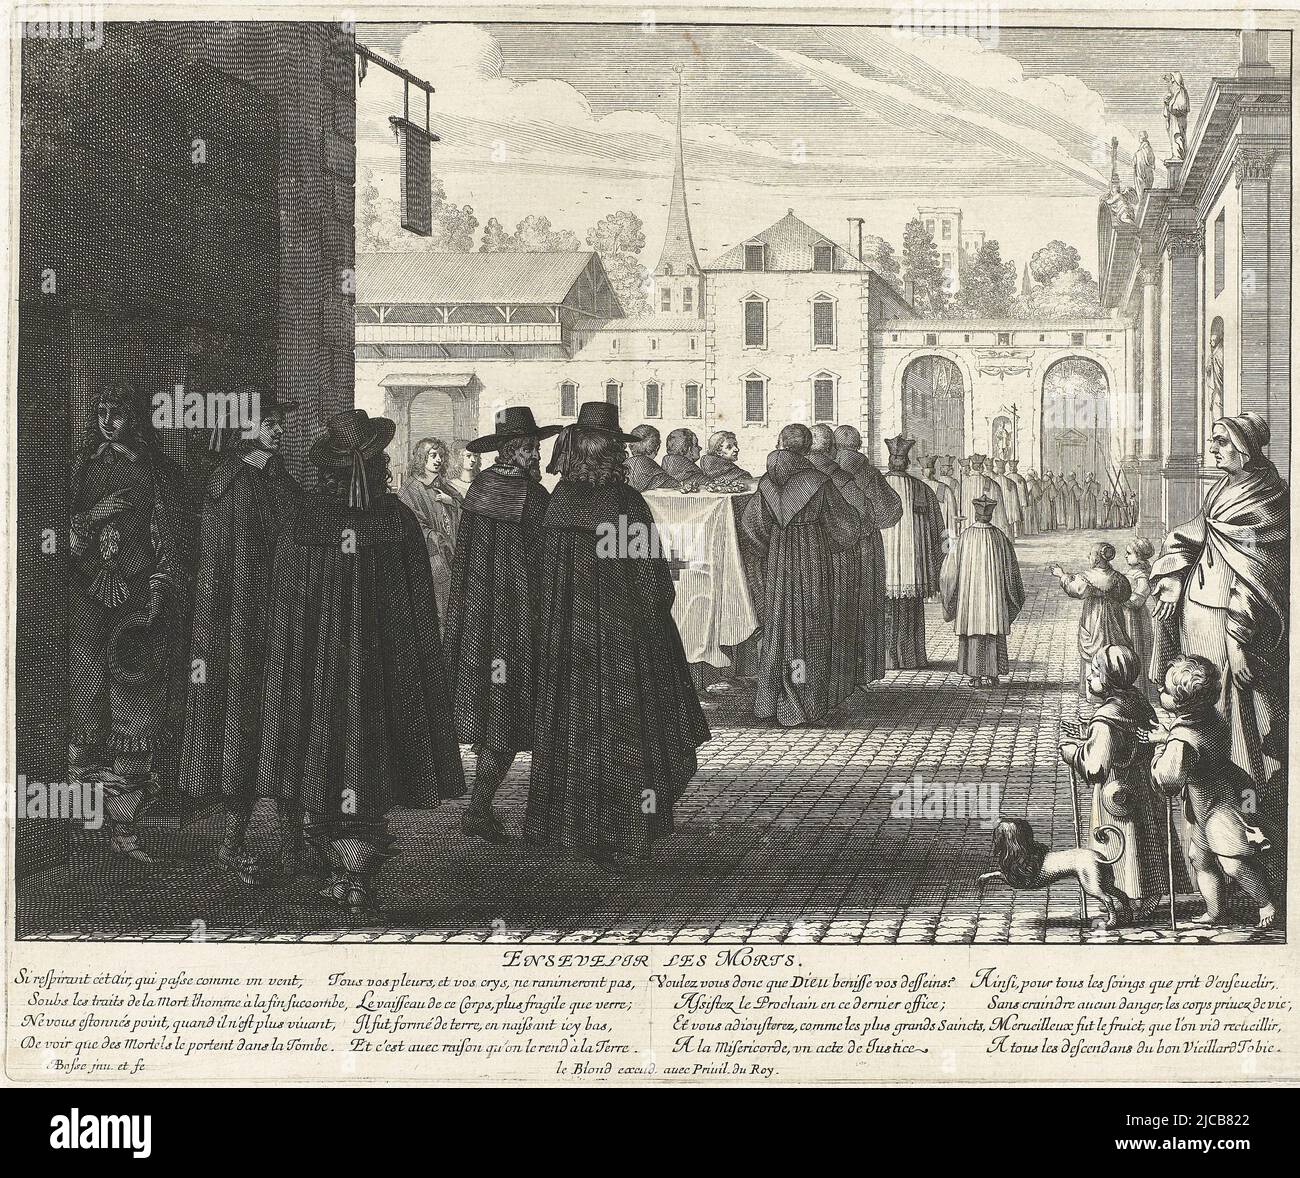 Funeral procession where the gentlemen in the foreground, seen from behind, are dressed in black mourning clothes Monks and priests walk in front of the bier On the right, citizens looking on, Burying the Dead Ensevelir les Morts  Les sept oeuvres de mis, print maker: Abraham Bosse, (mentioned on object), Abraham Bosse, (mentioned on object), publisher: Jean Leblond (I), (mentioned on object), Paris, 1640 - 1642, paper, engraving, etching, h 260 mm × w 314 mm Stock Photo